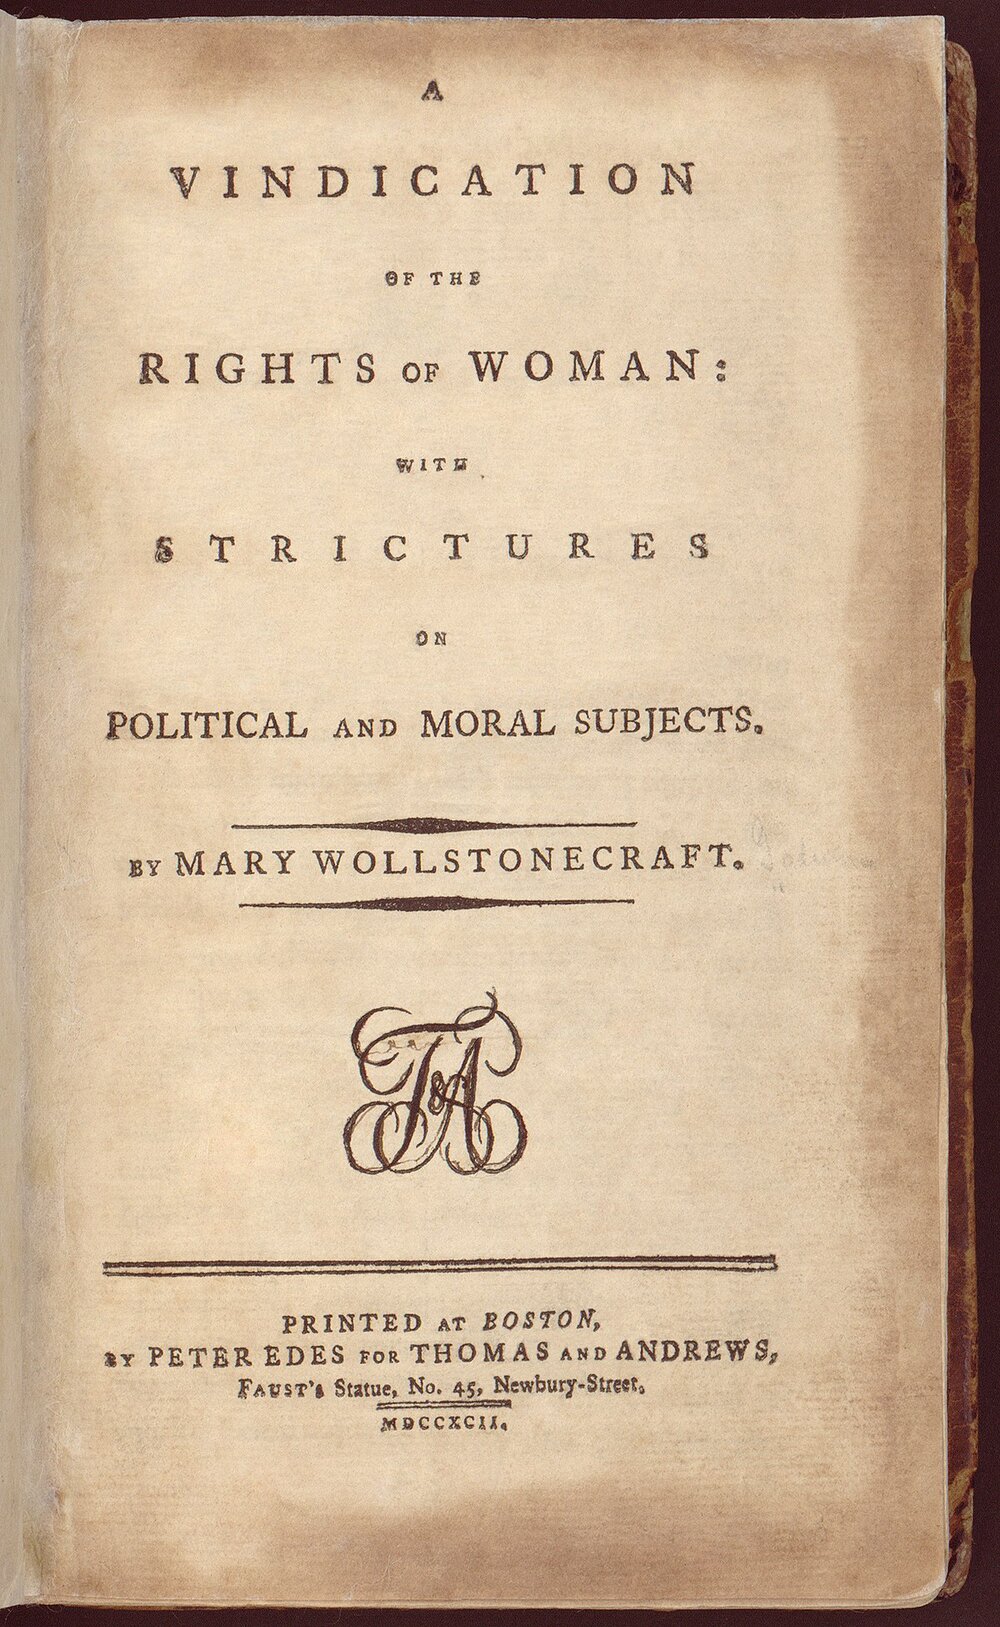 The early life of Mary Wollstonecraft — East End Women's Museum